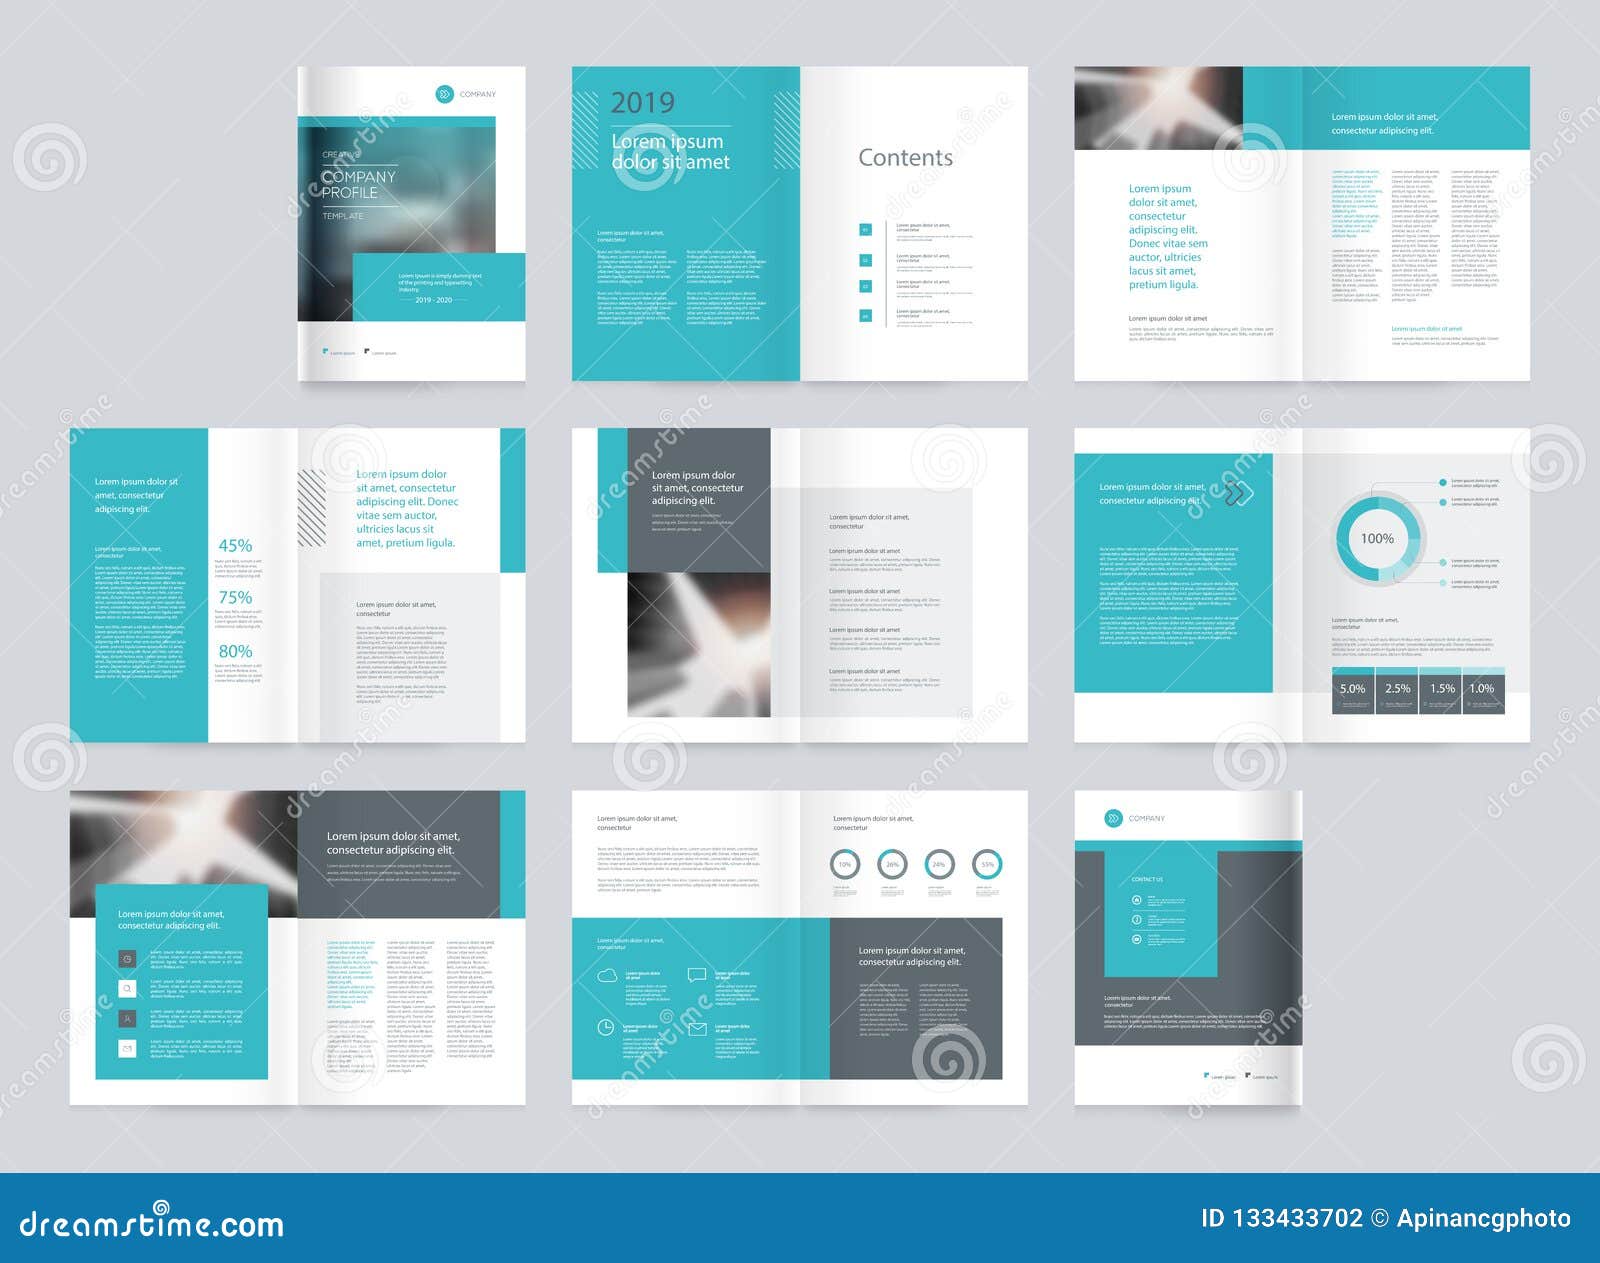 template layout  with cover page for company profile ,annual report , brochures,proposal , flyers, leaflet, magazine,book co